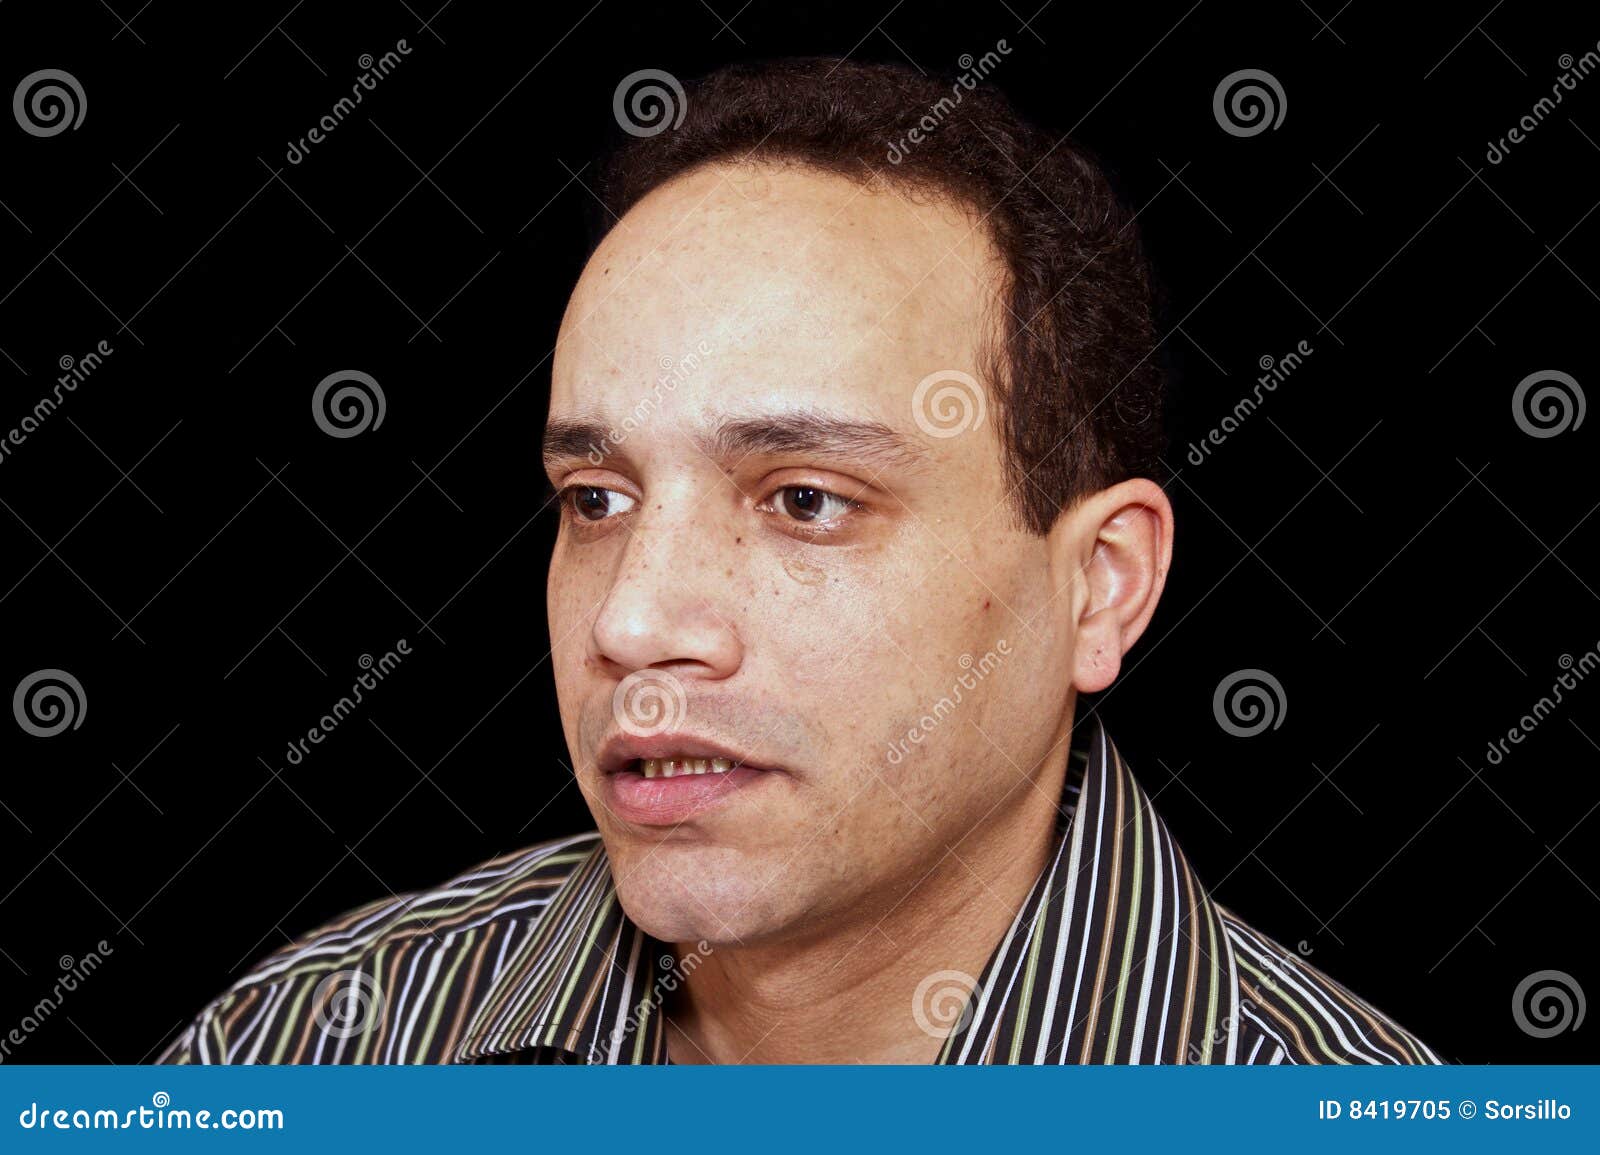 Looking Concerned Royalty Free Stock Photo - Image: 8419705